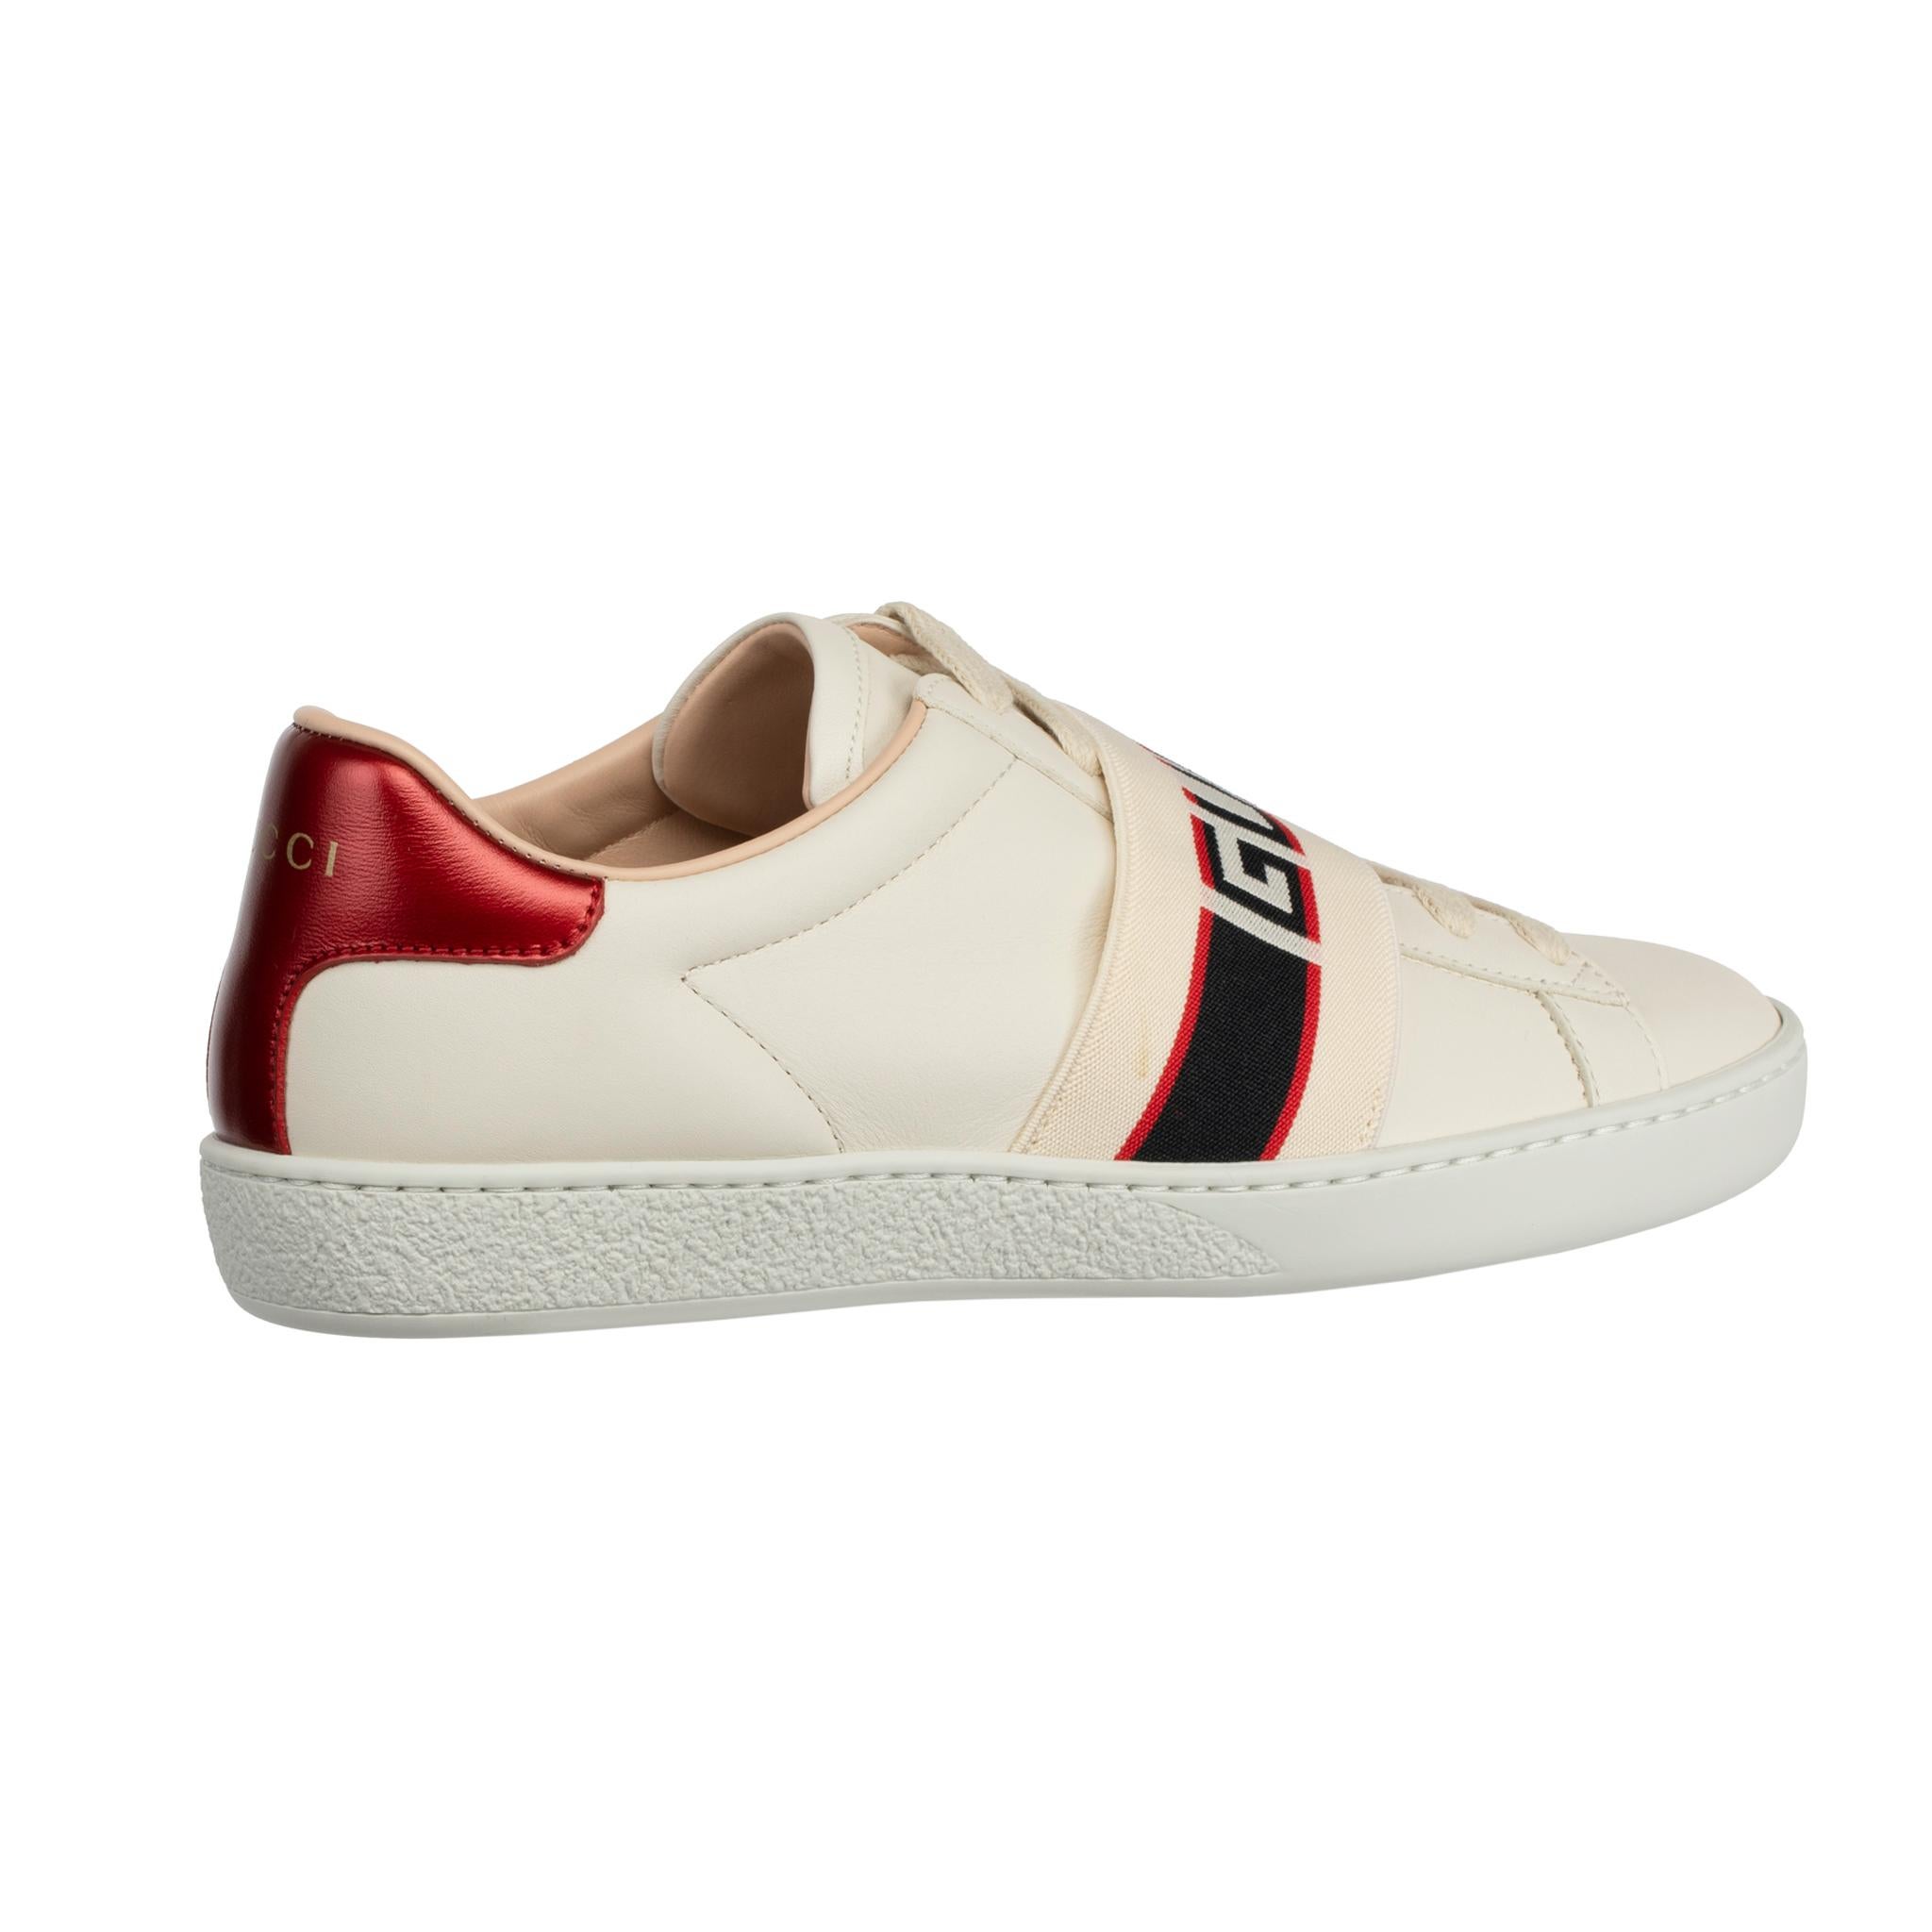 Gucci Ace Turnschuhe in Off-White & Metallic Rot 35.5 IT im Angebot 1